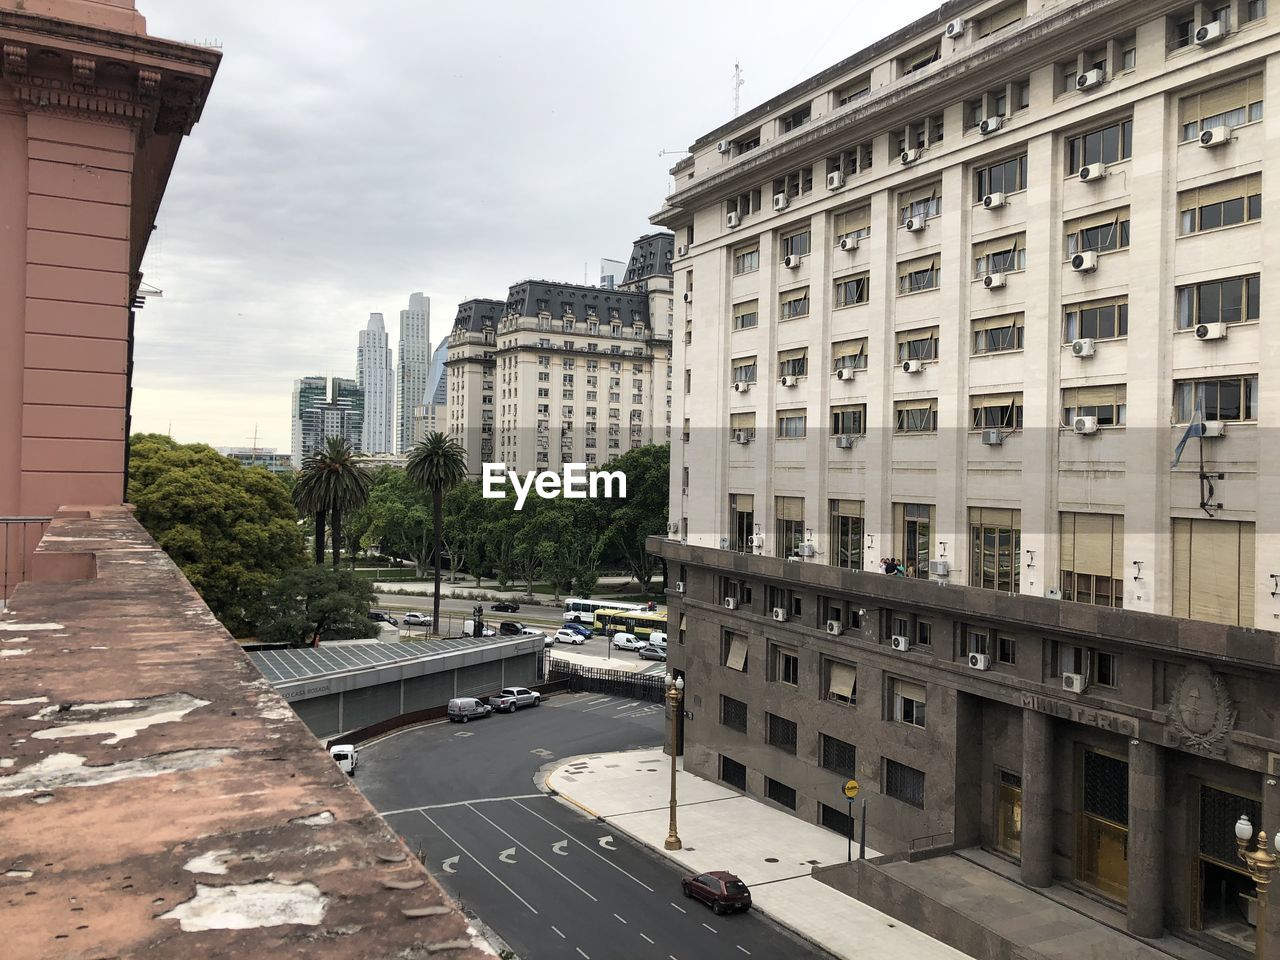 VIEW OF BUILDINGS IN CITY